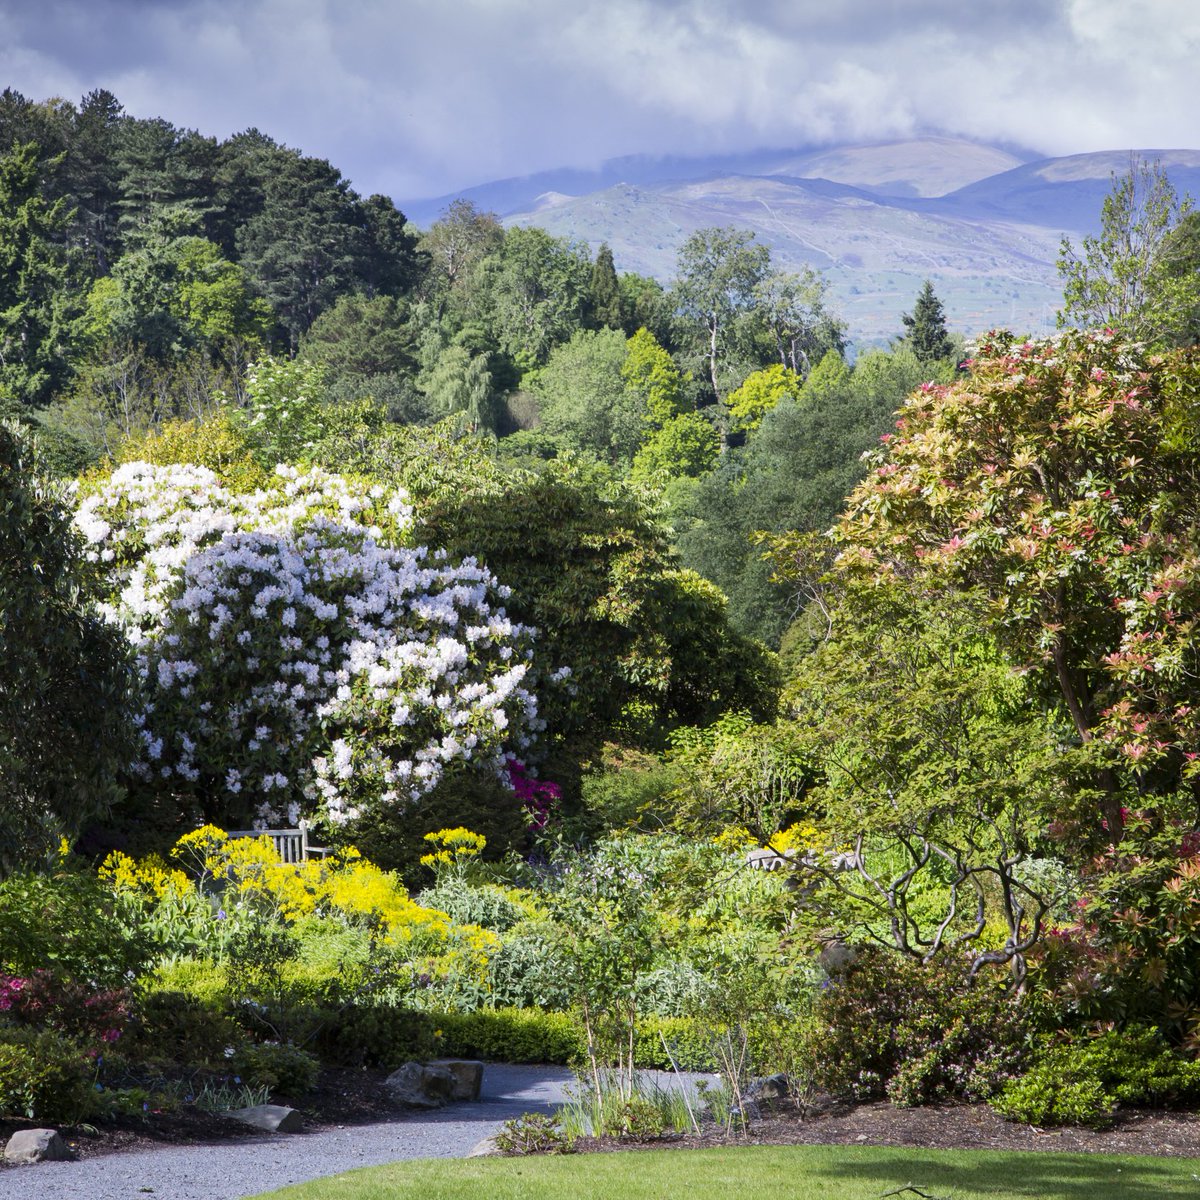 Bodnant Garden was forged by the vision of one man, Henry Davis Pochin. He bought the estate in 1874 and along with landscape designer Edward Milner, he transformed it into the world-renowned garden we see today. Find out more about @BodnantGardenNT here: bit.ly/2BW4nan